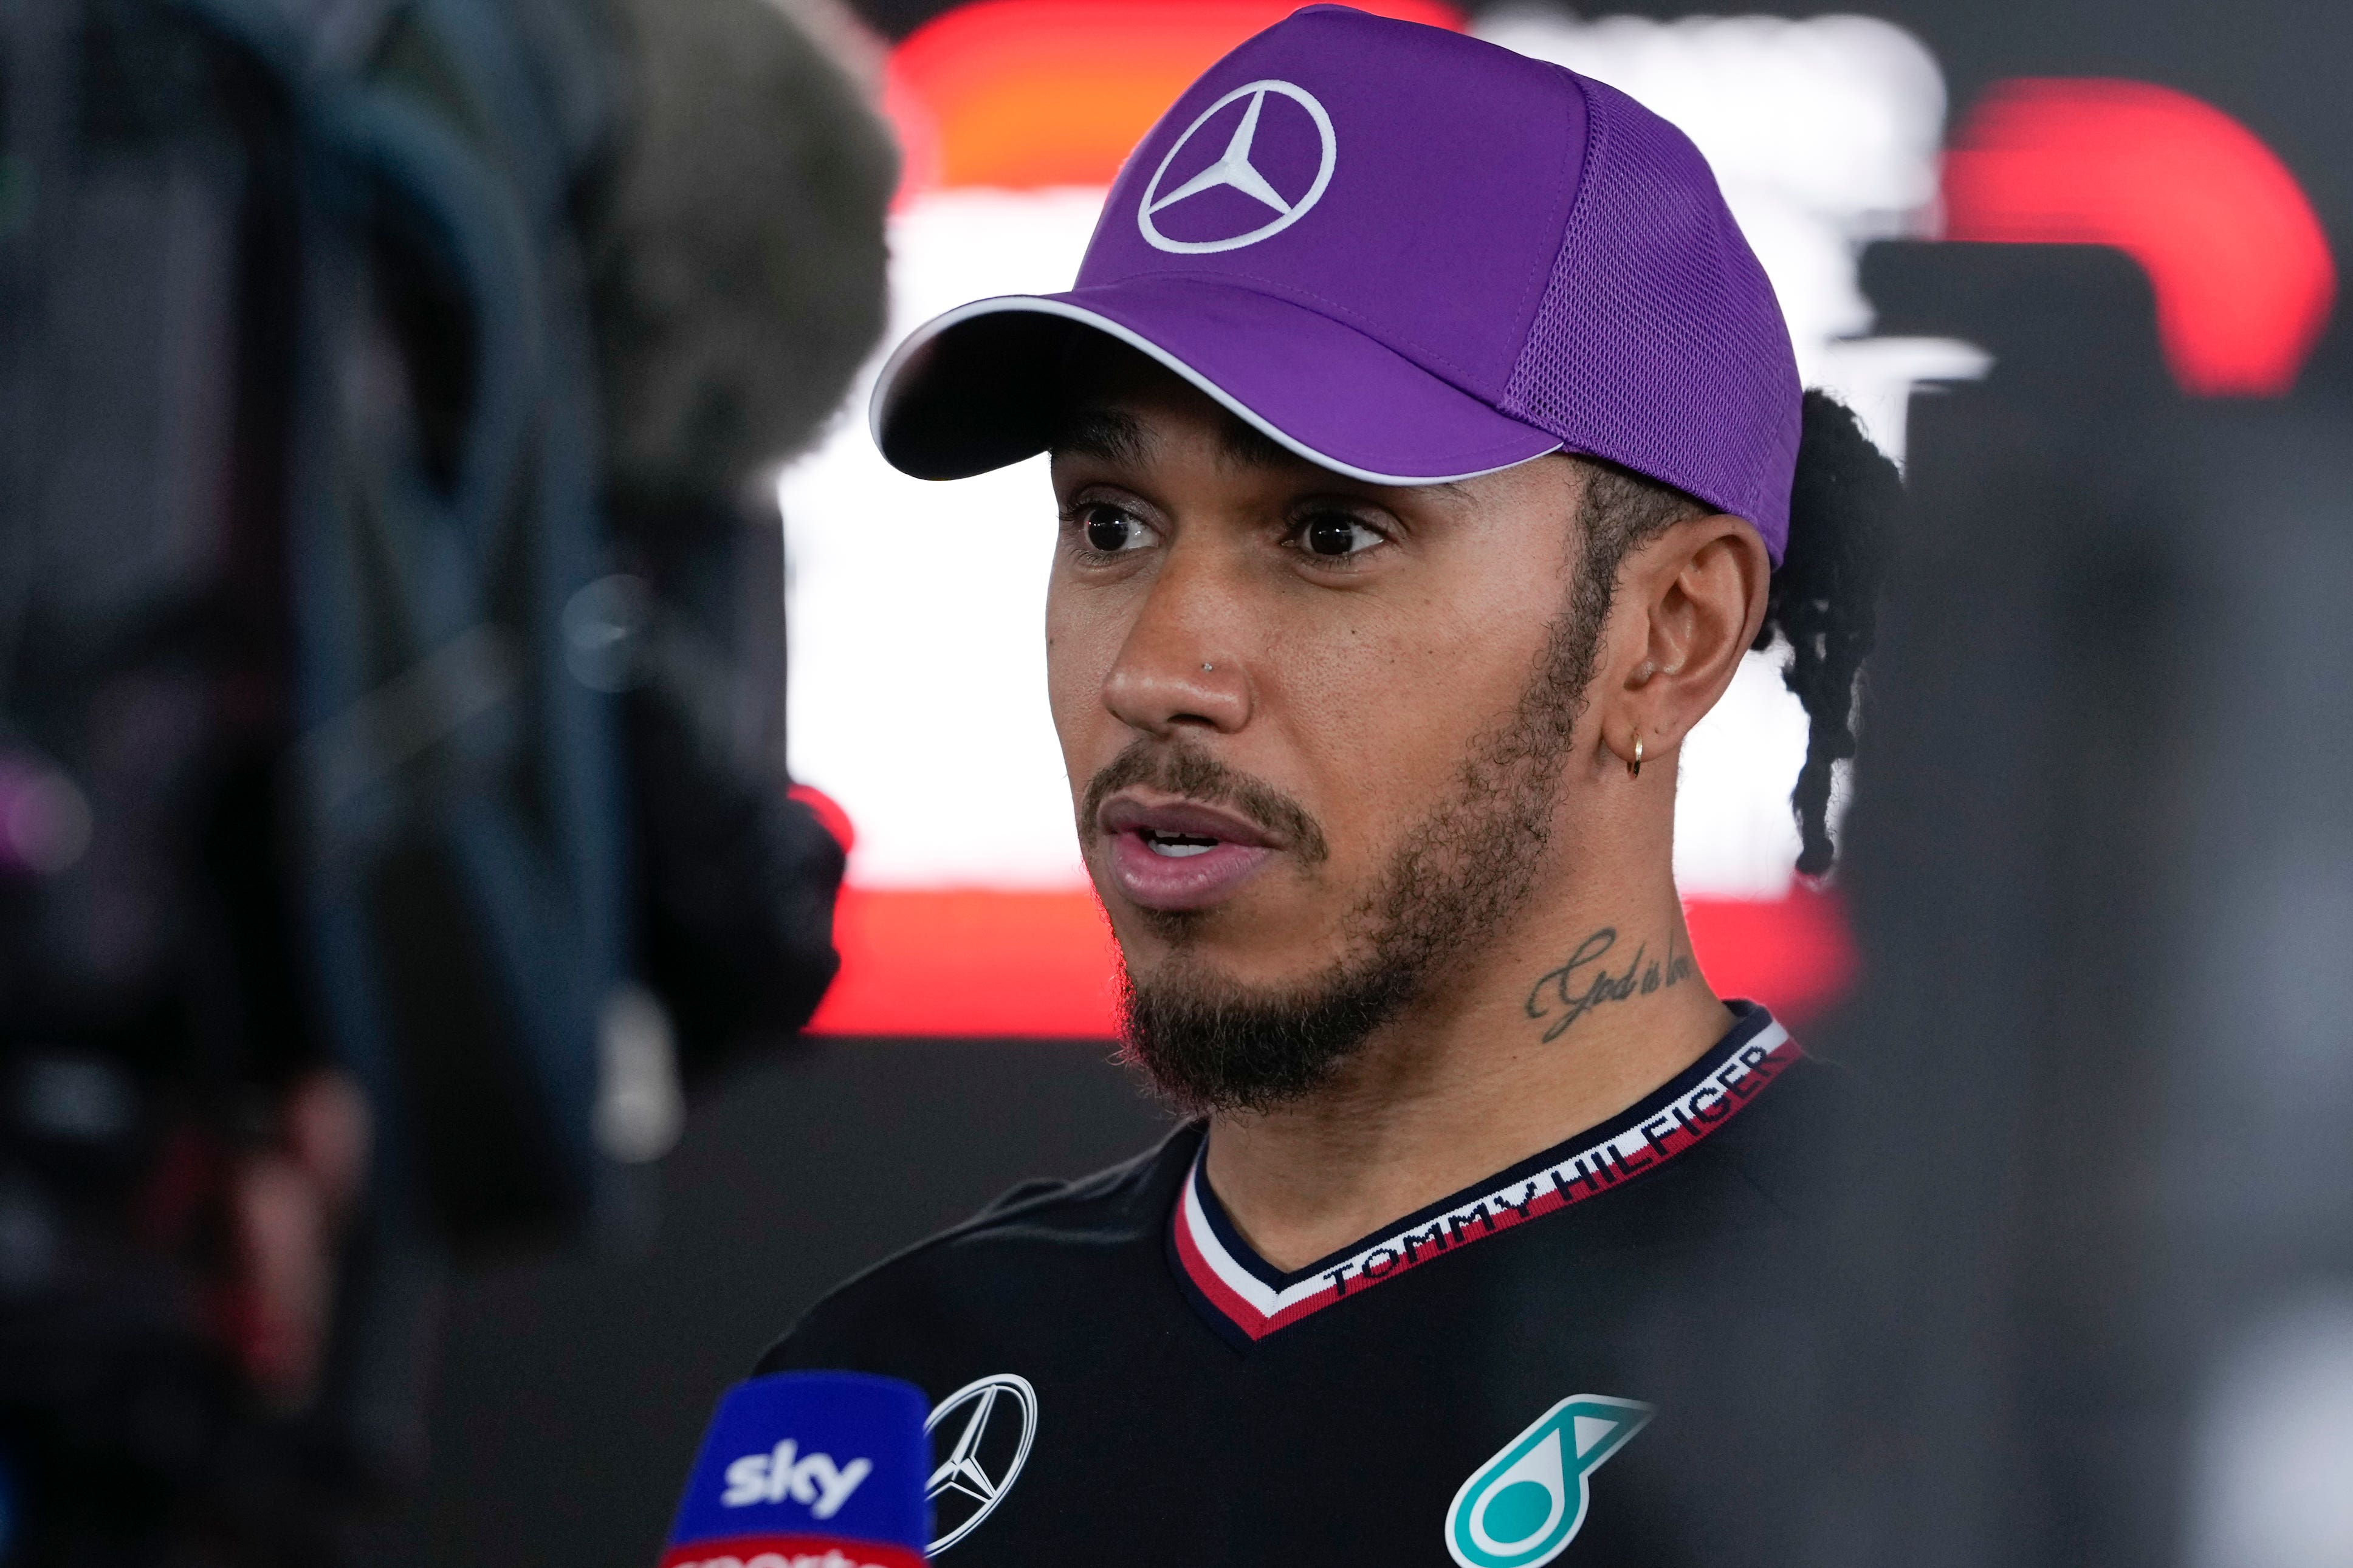 Mercedes driver Lewis Hamilton talks to reporters after qualifying in Japan